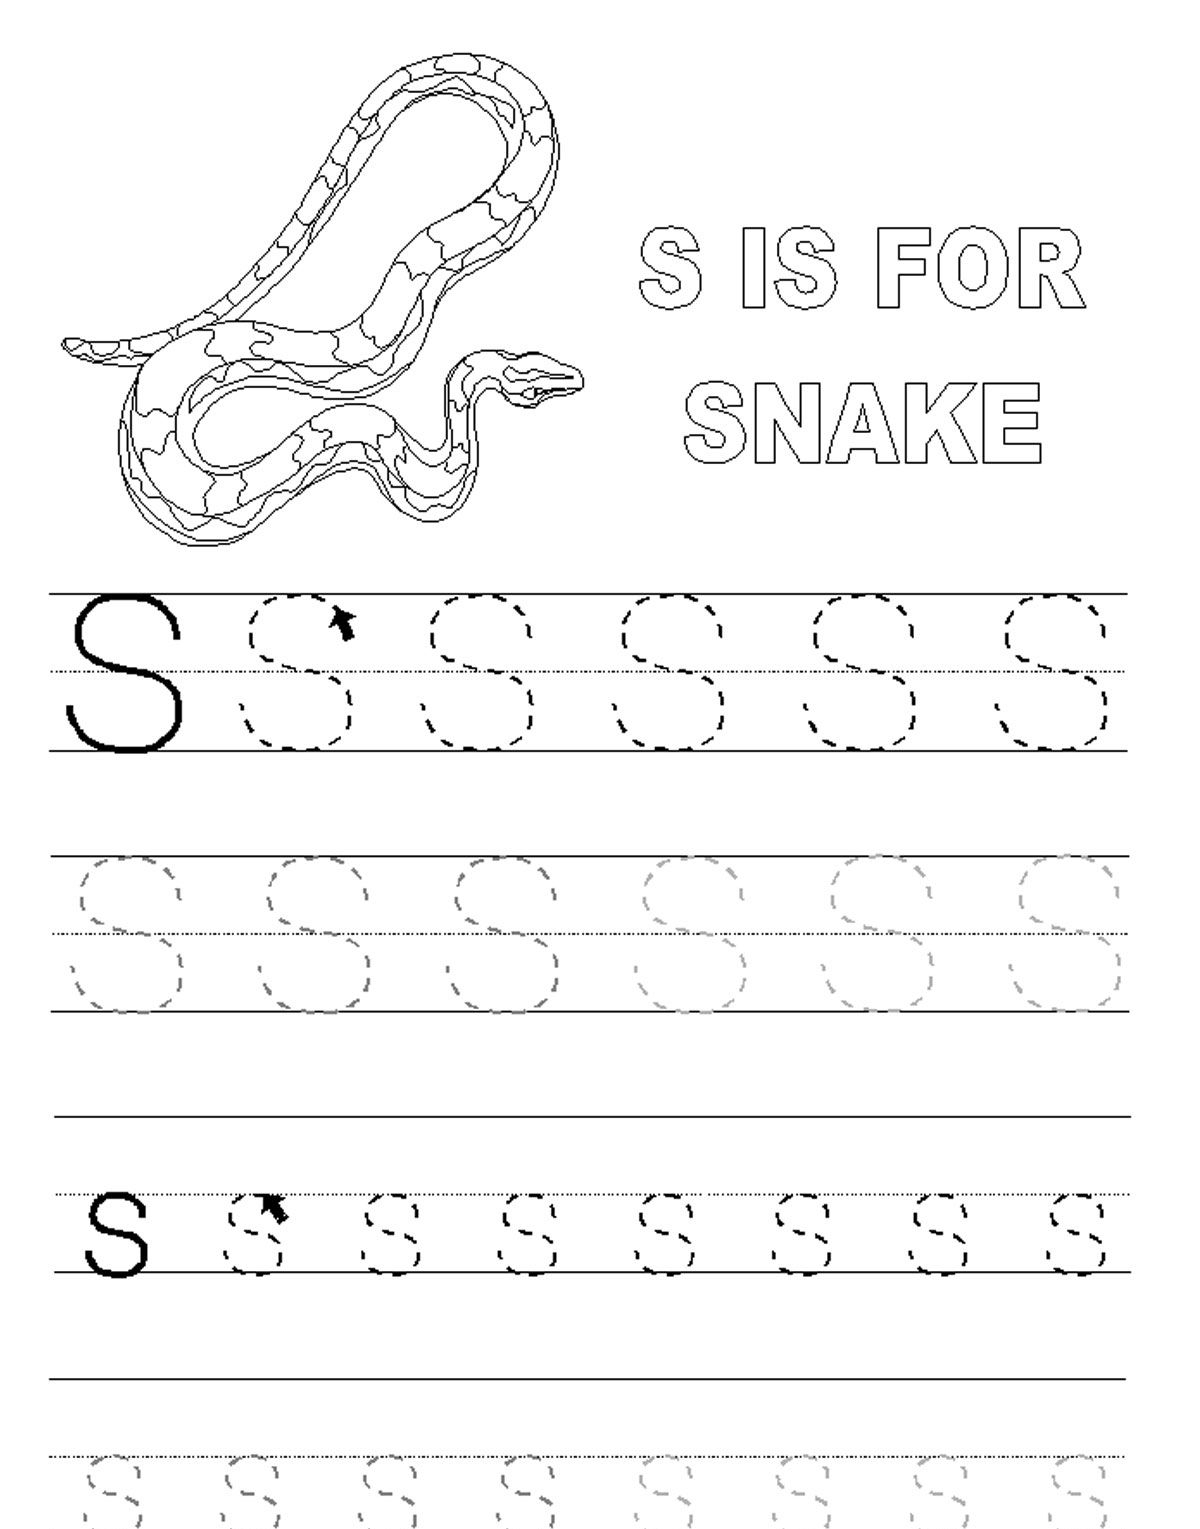 Pindiana Reid On Toddler Time | Letter S Worksheets pertaining to S Letter Tracing Worksheet